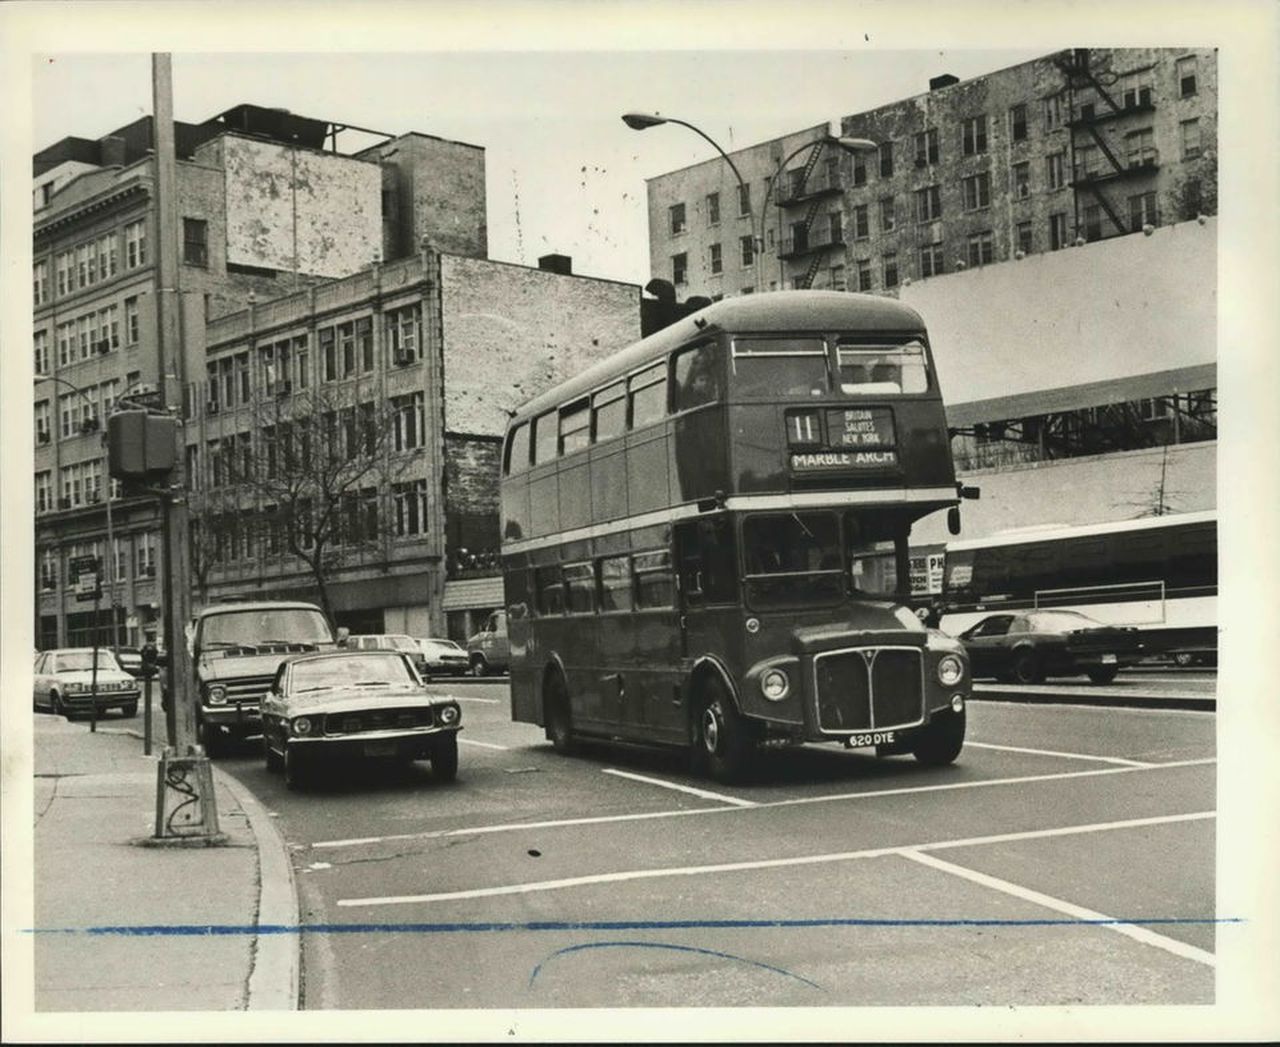 A London bus in an American city. Early 1970s ~